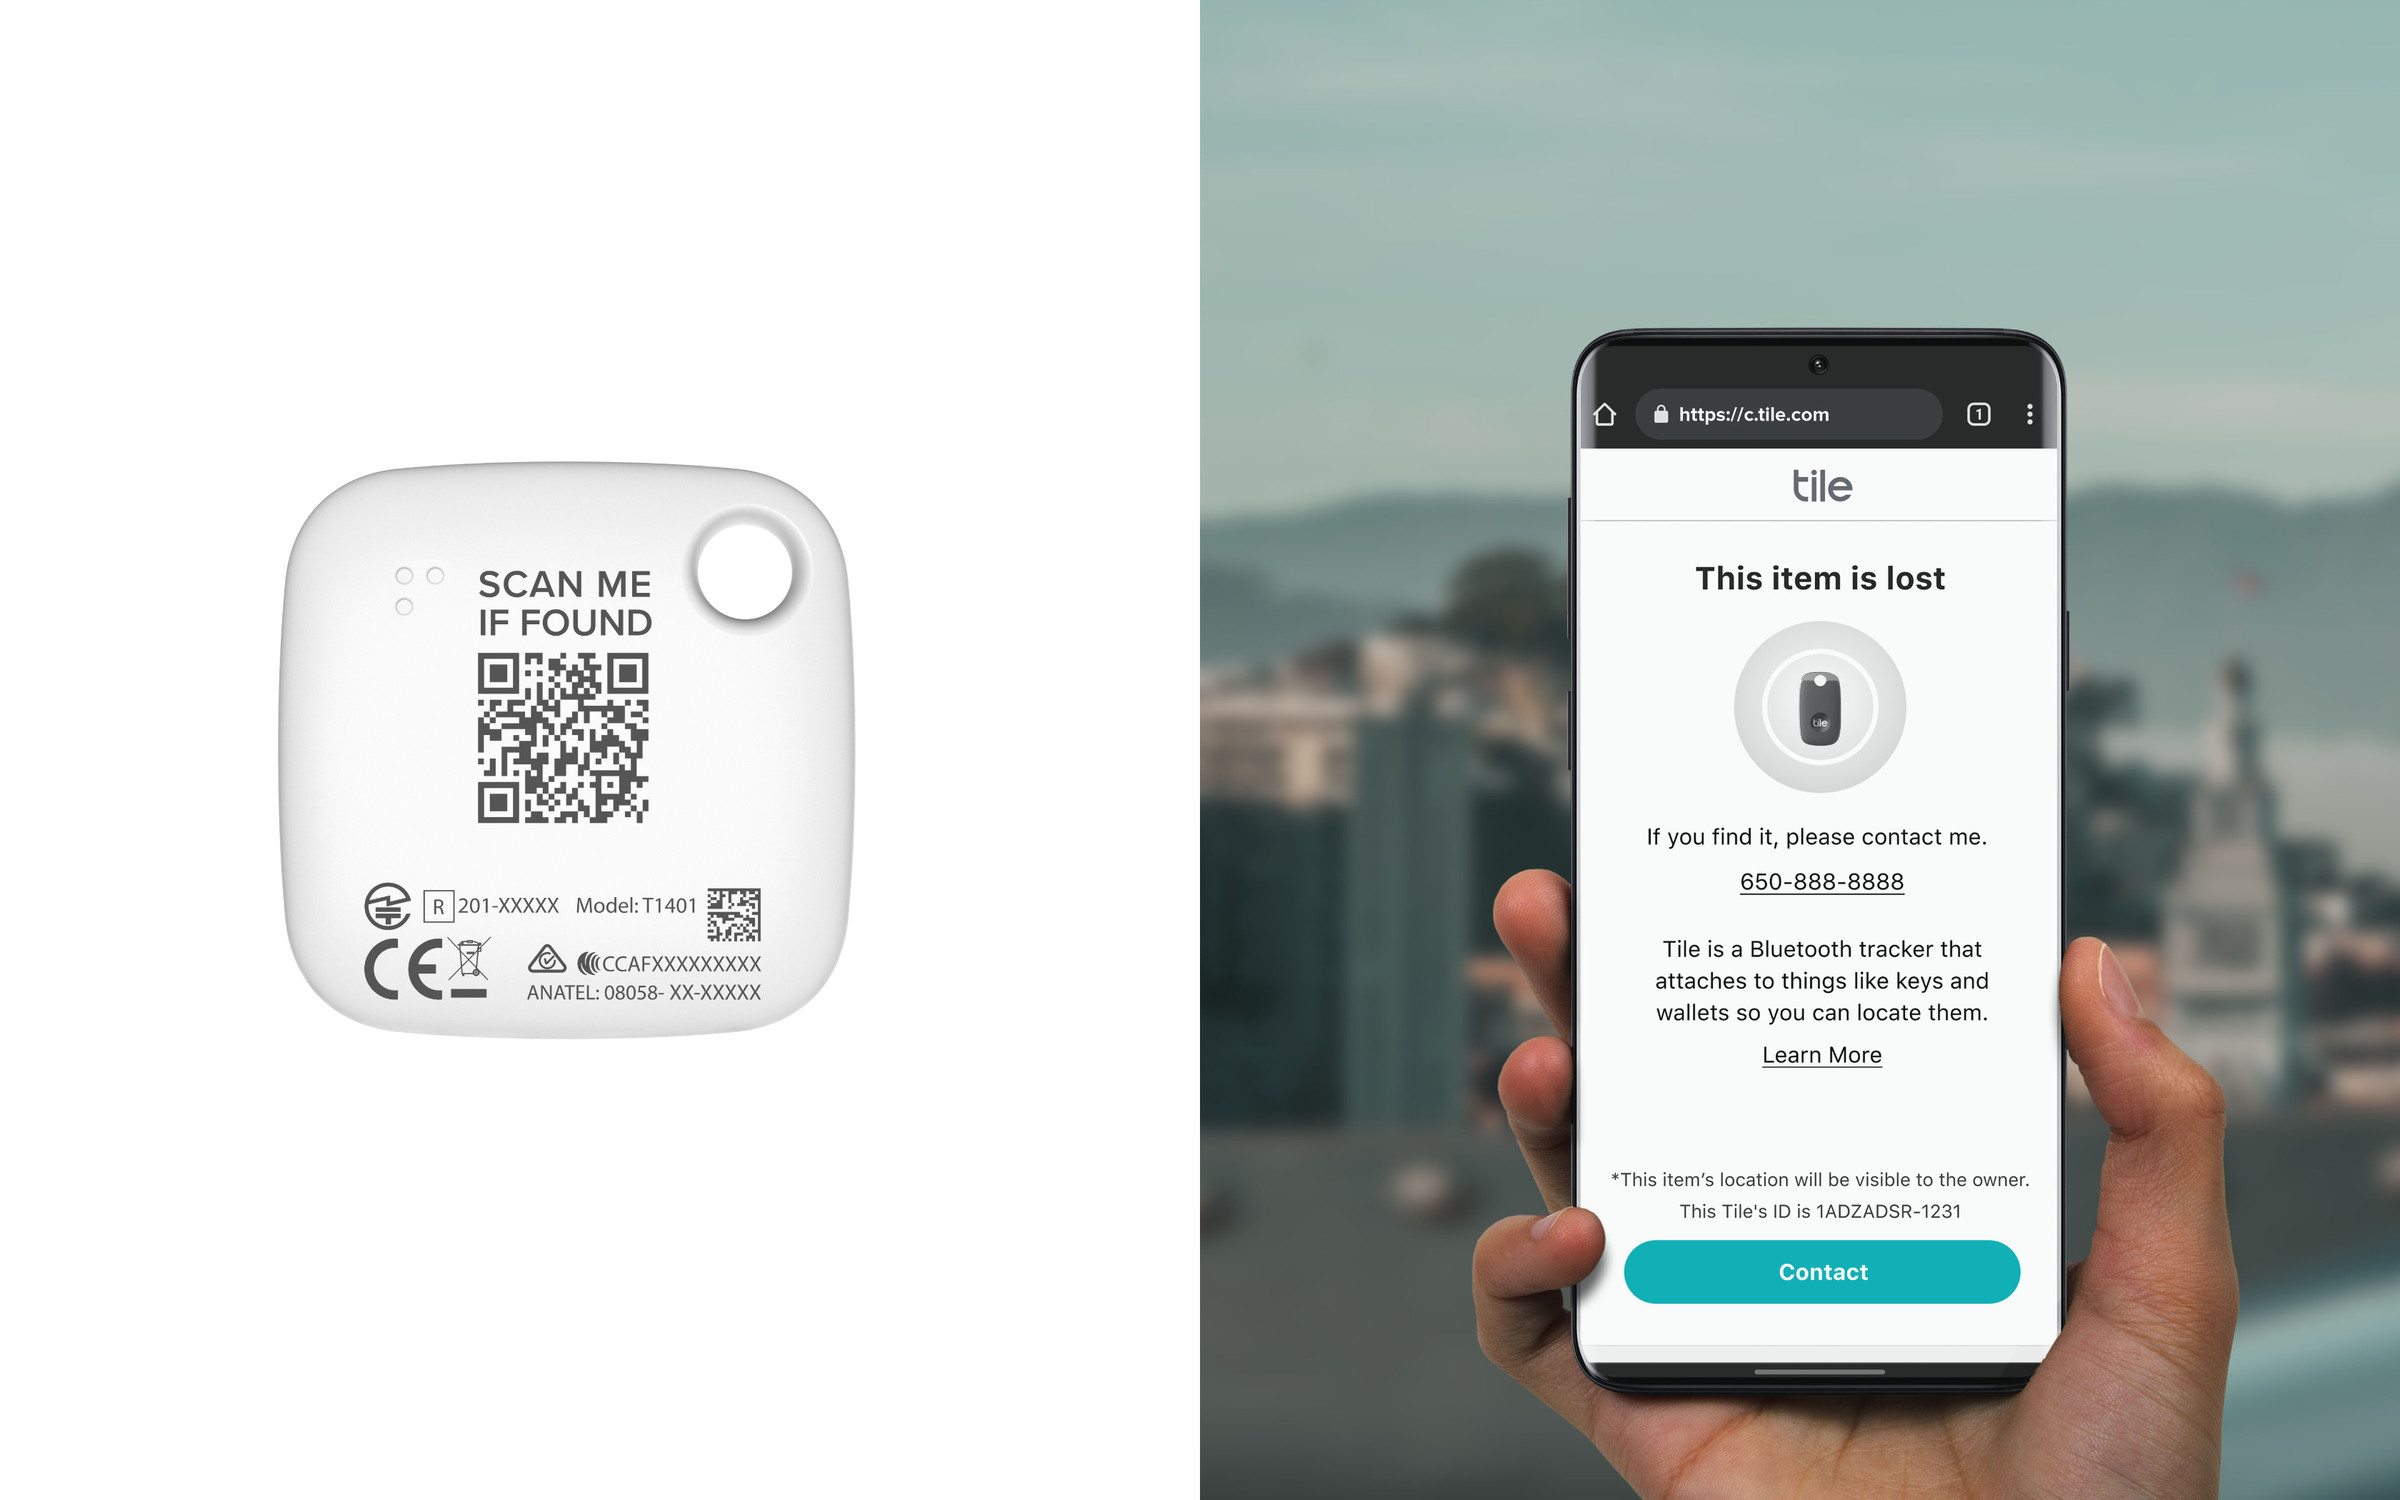 Tile’s new QR-code powered Lost and Found feature